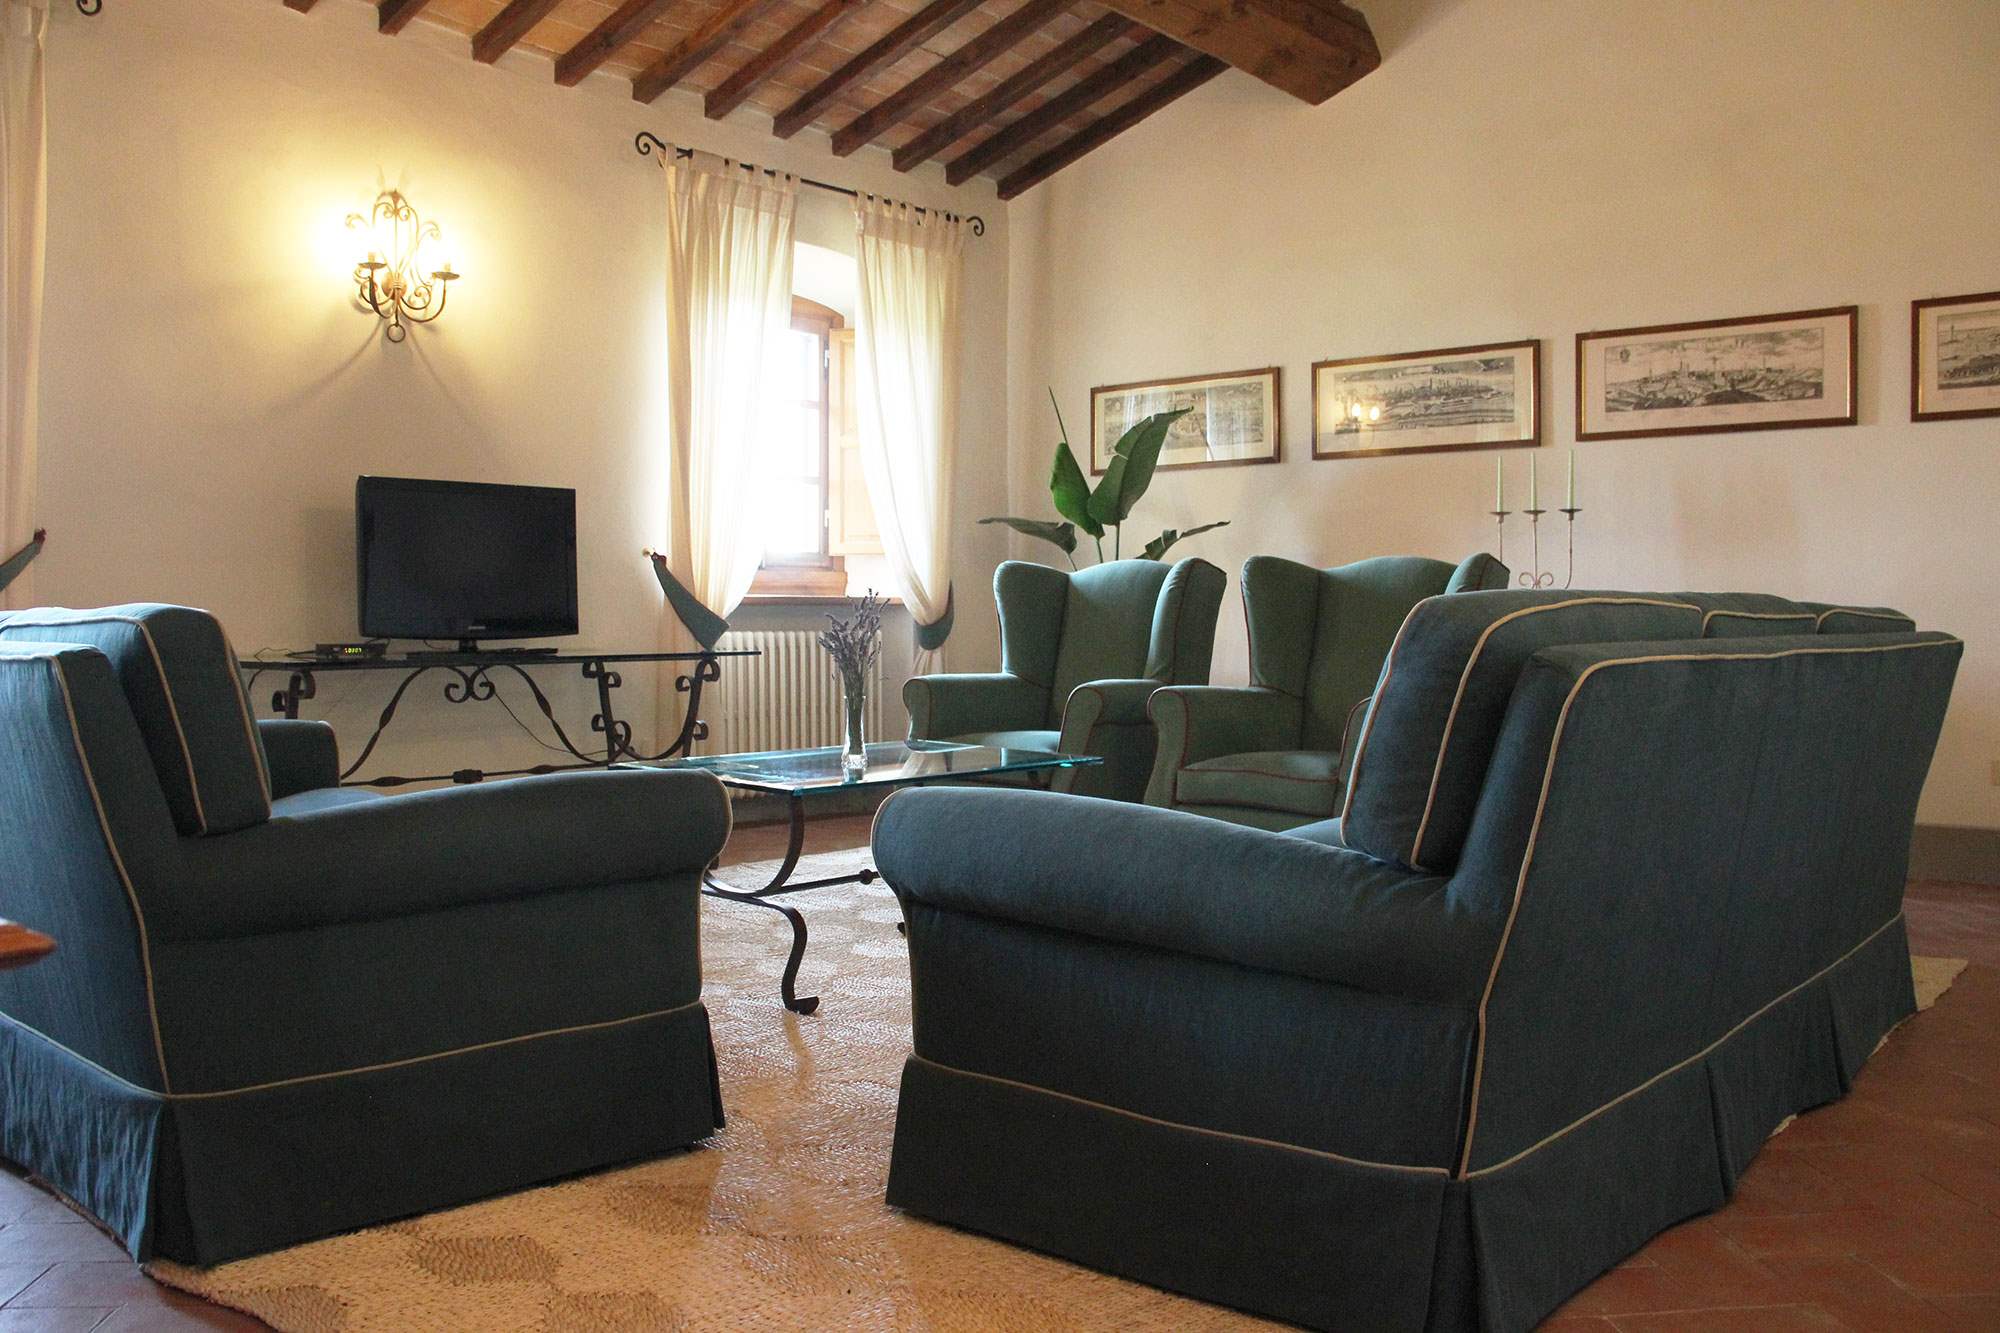 Apartment Loggia, 4 bedroom apartment in Chianti & Countryside, Tuscany Photo #5